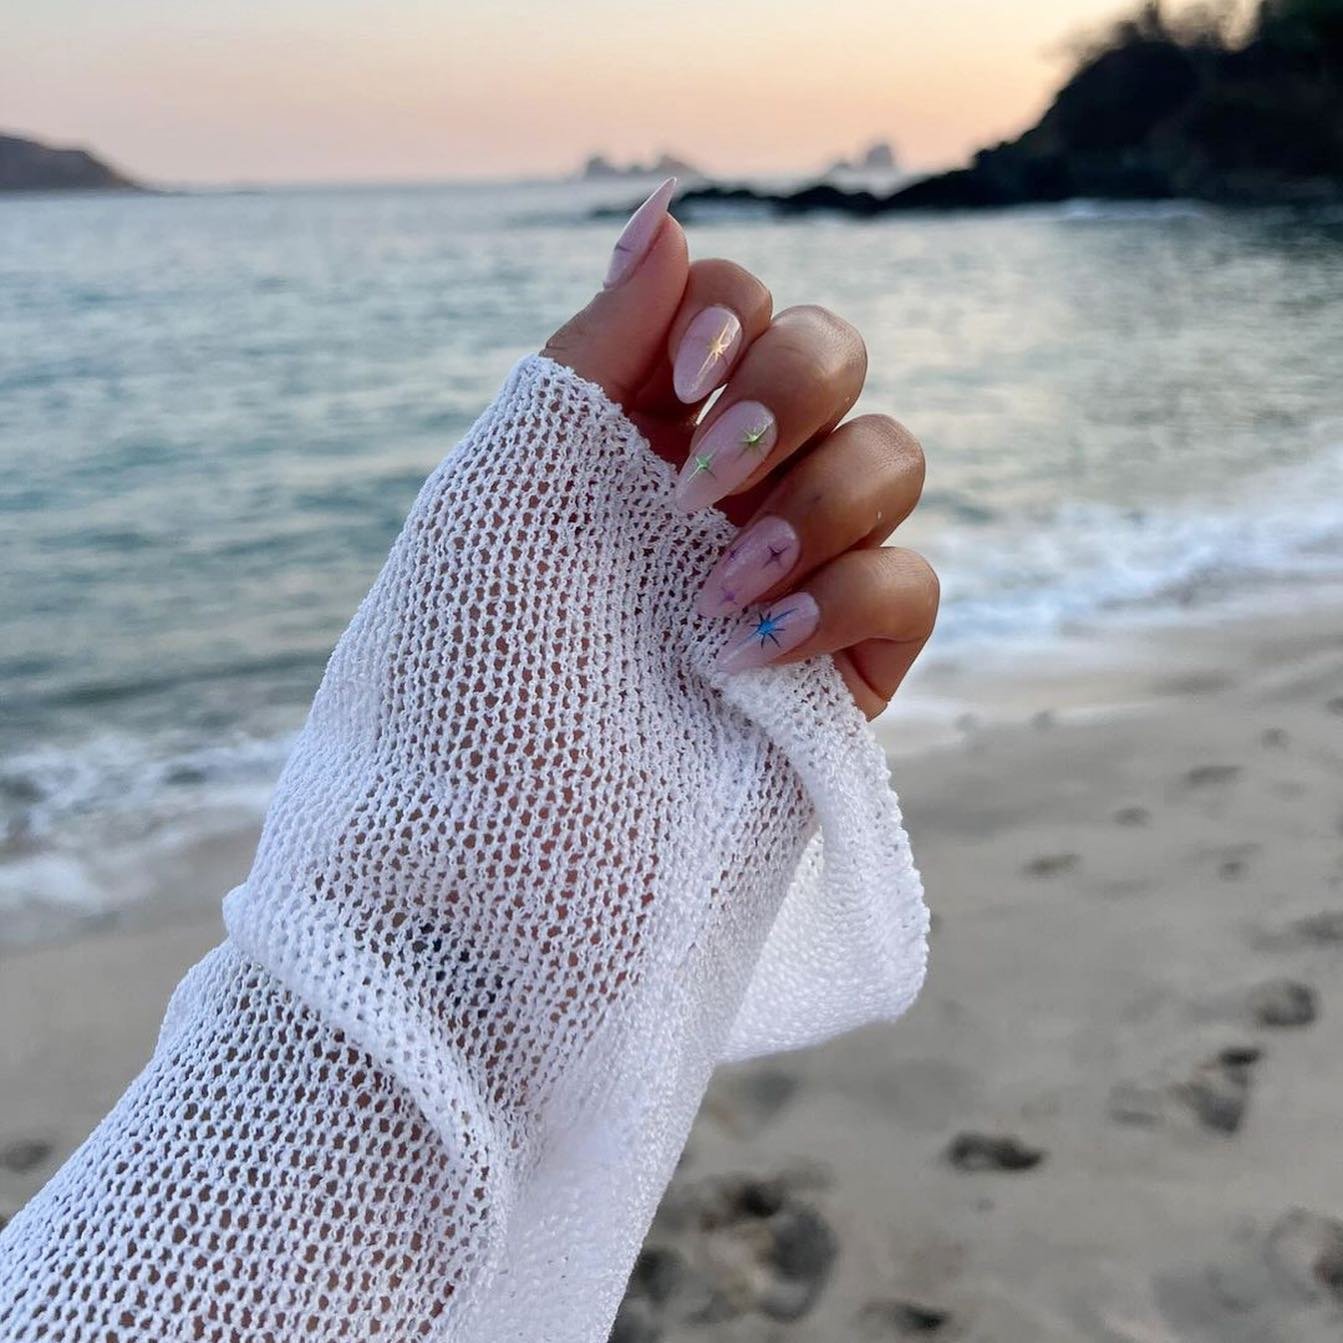 Vacation nails 💅🏽🌴🌺
Summer is coming!! Are you ready to show those nails off?

Book nails at our La Brea &amp; Silver Lake locations today. Link in bio 💕

💅🏽 by @clawsxkat 

#thepowderoomla #losangeleshairstylist #hollywoodhairstylist #lahairs